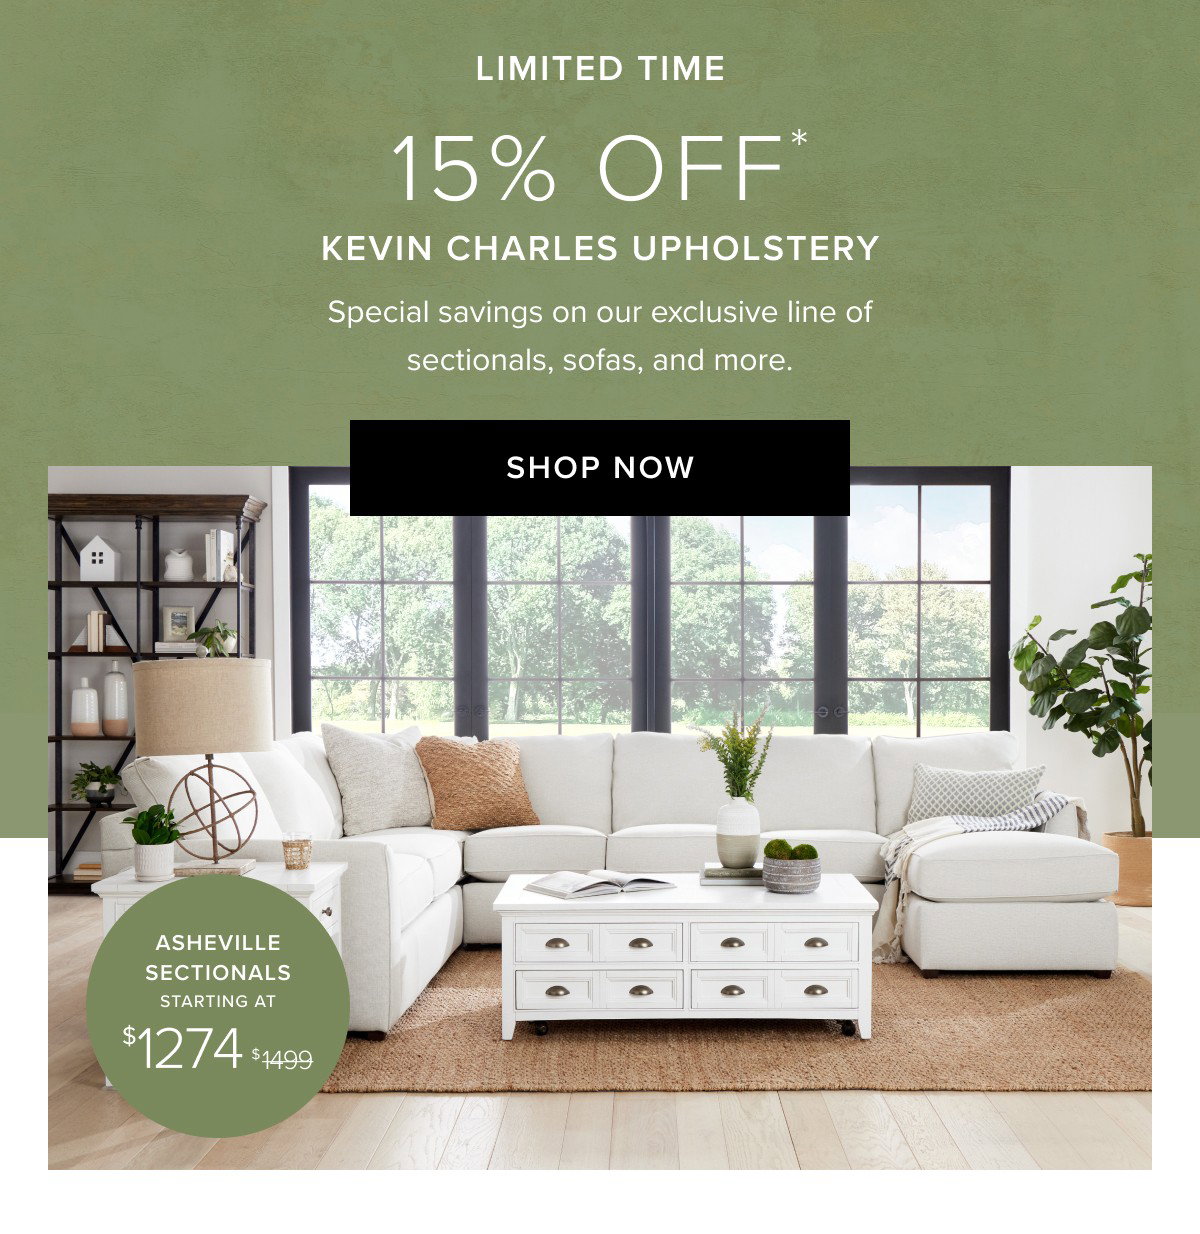 15% off kevin charles upholstery. Shop now